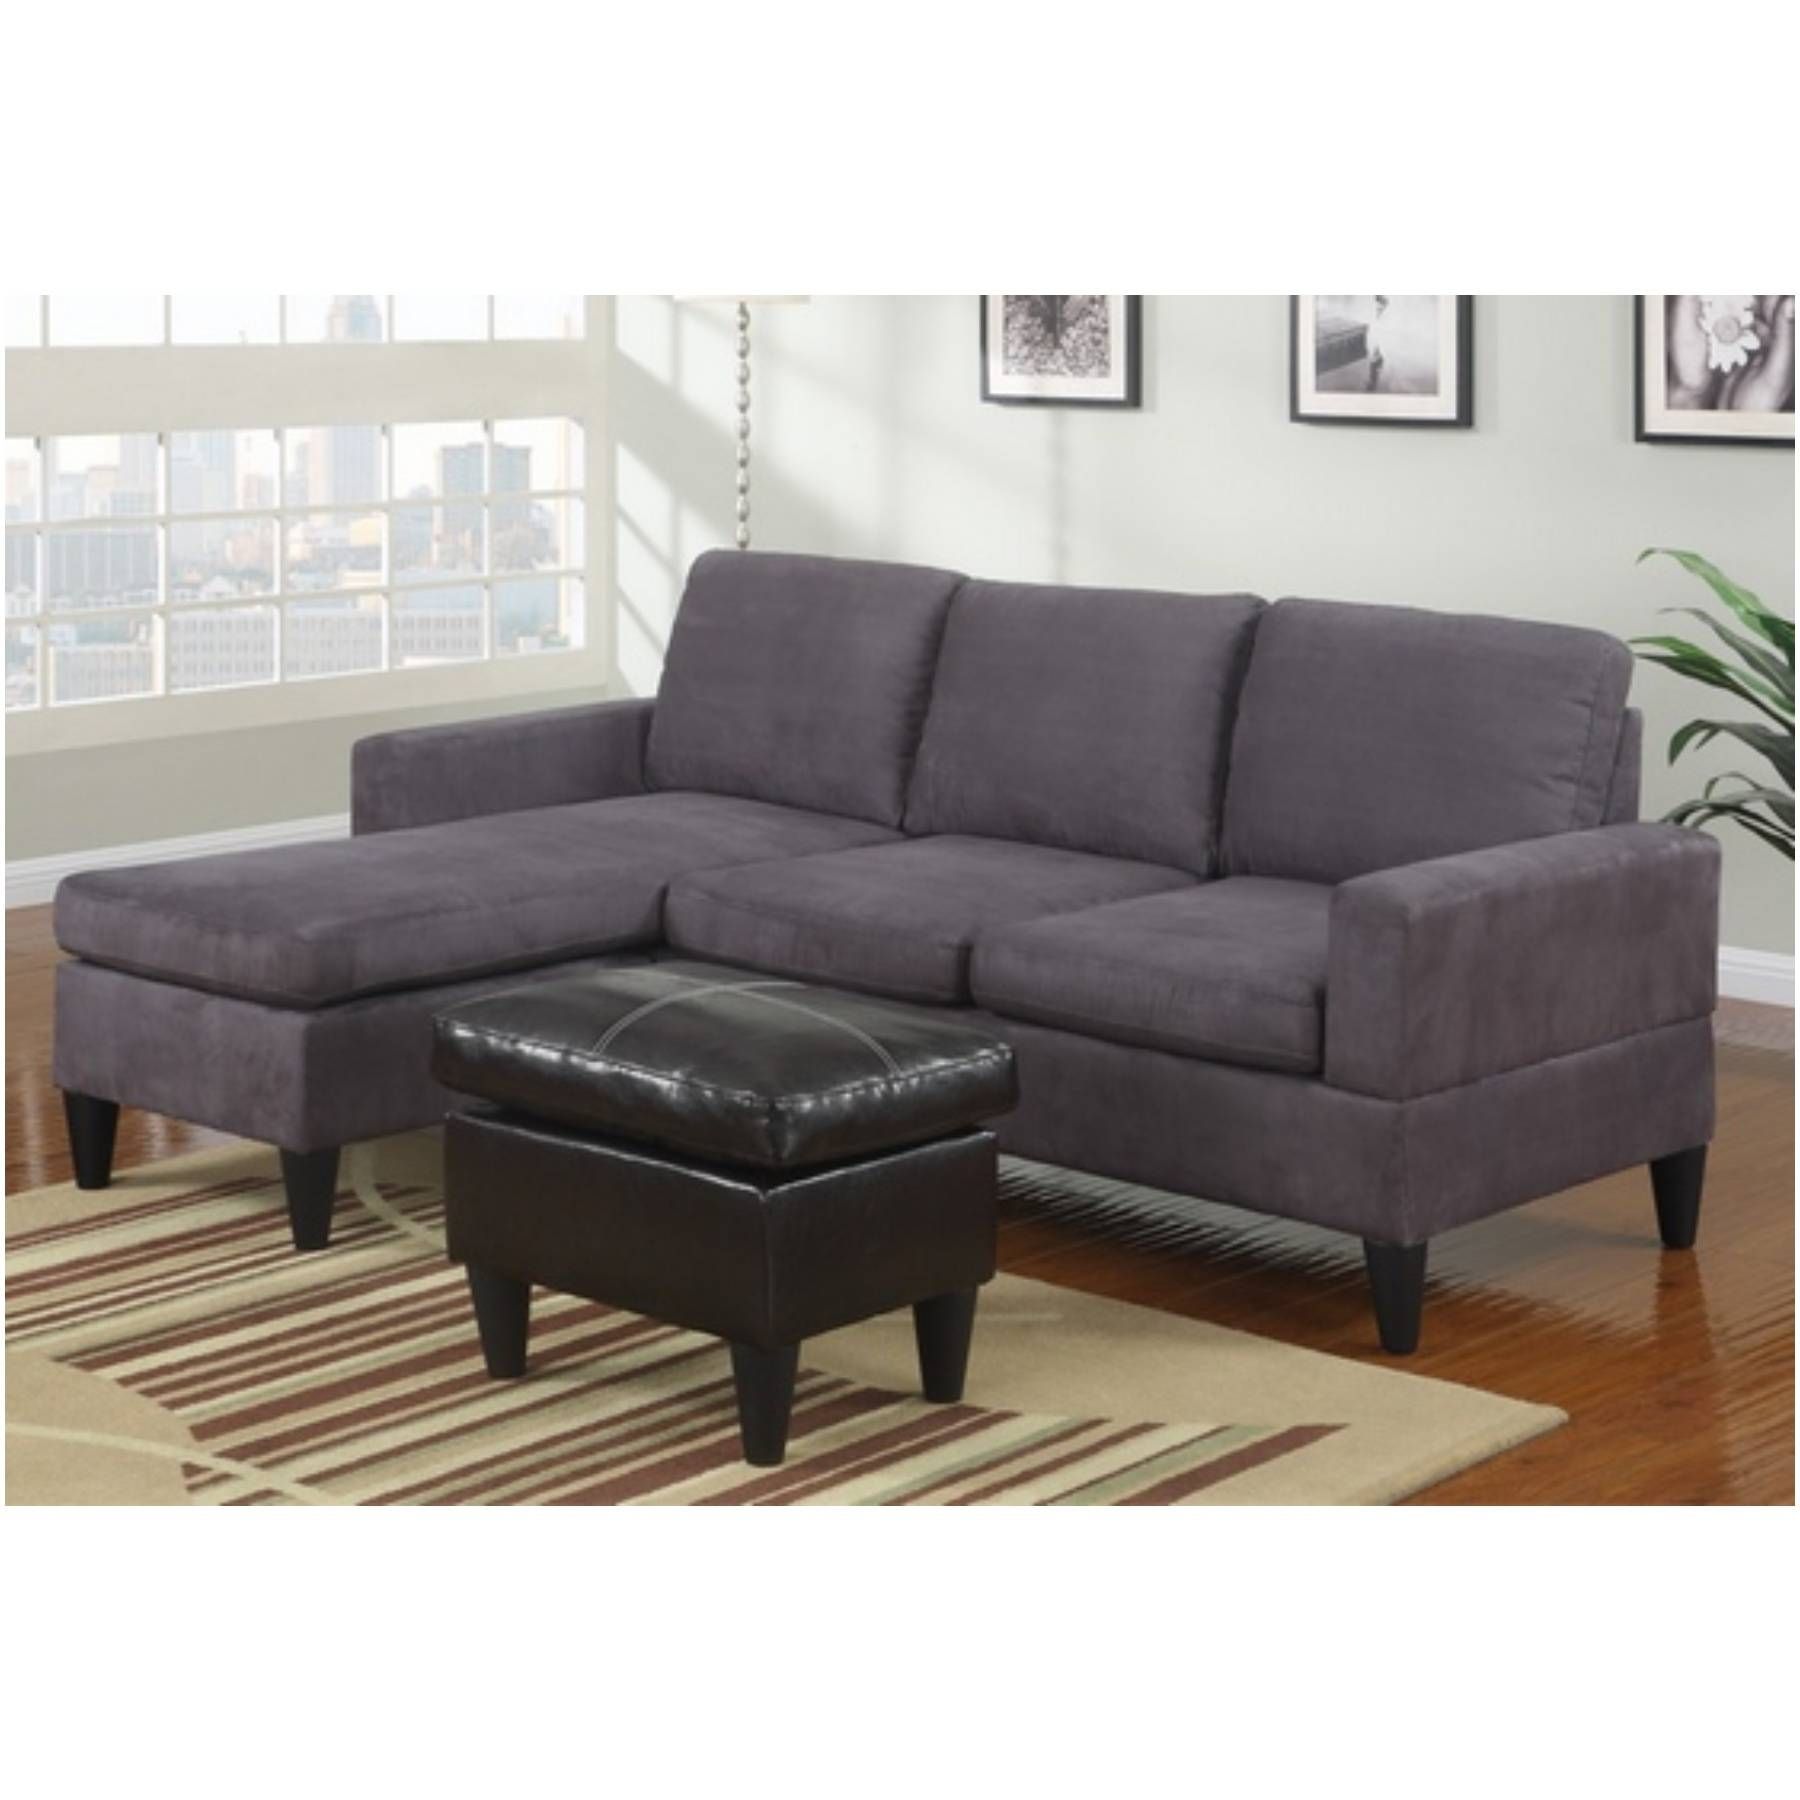 Apartment Sectional Sofa With Chaise | Tehranmix Decoration In Apartment Sectional Sofa With Chaise (View 9 of 30)